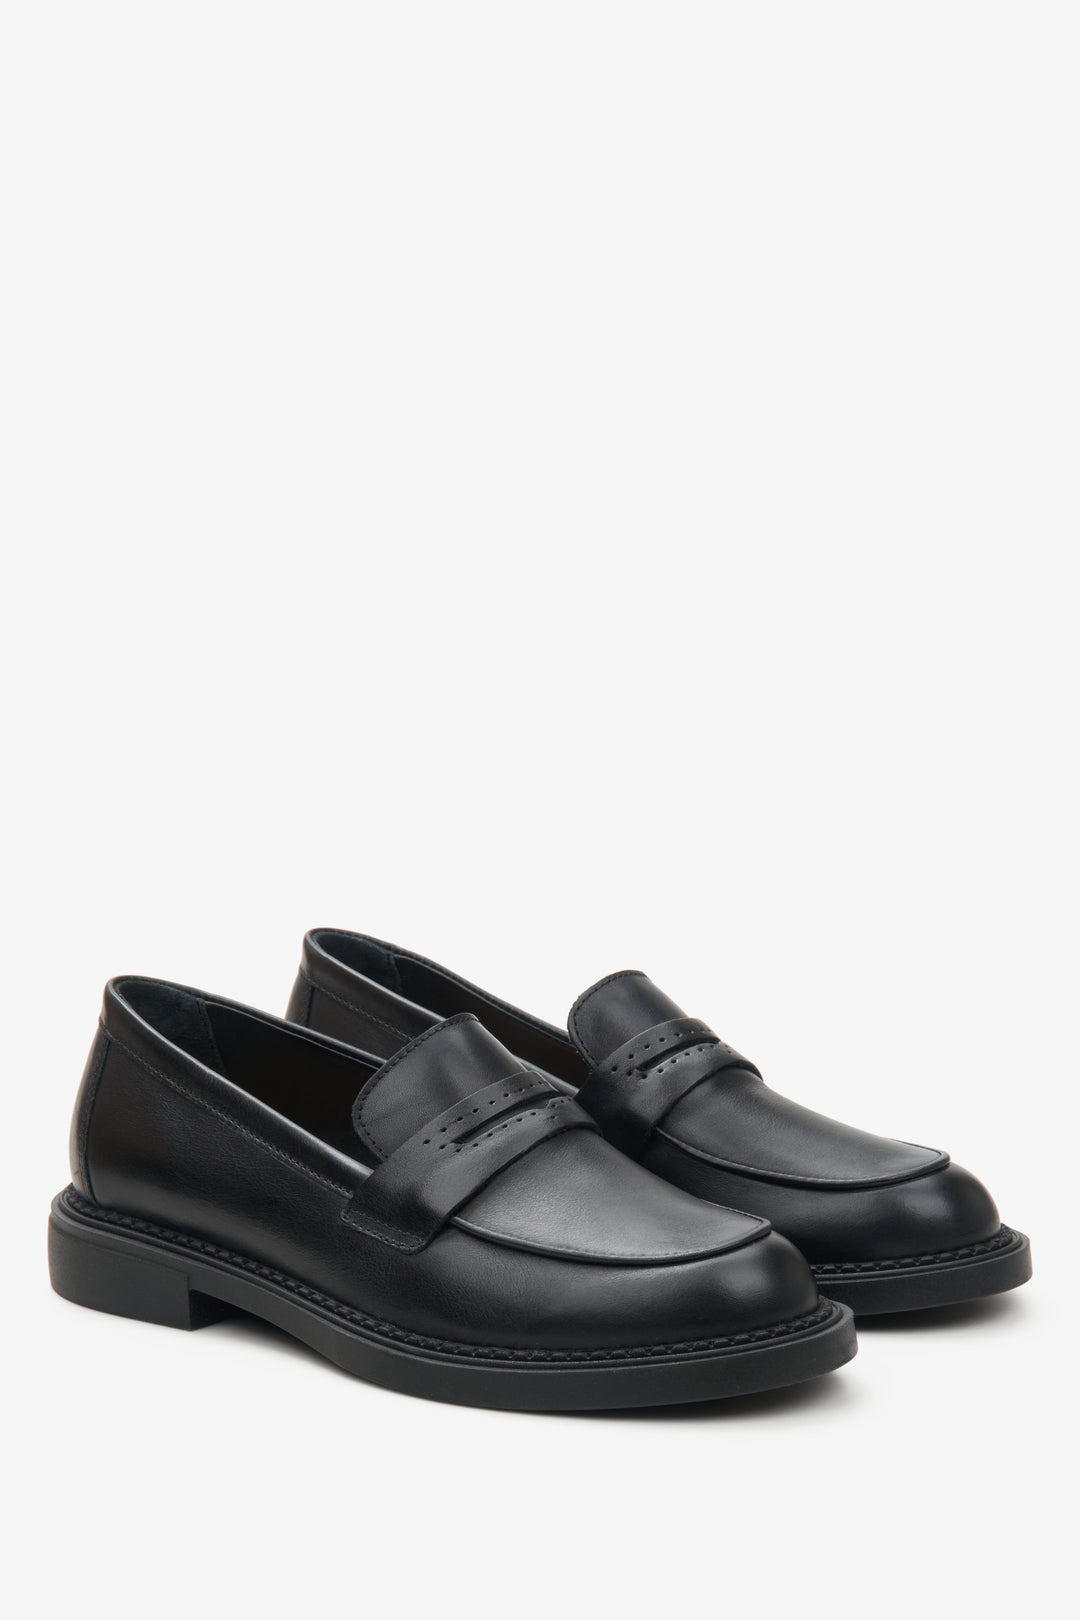 Classic women's black loafers by Estro.